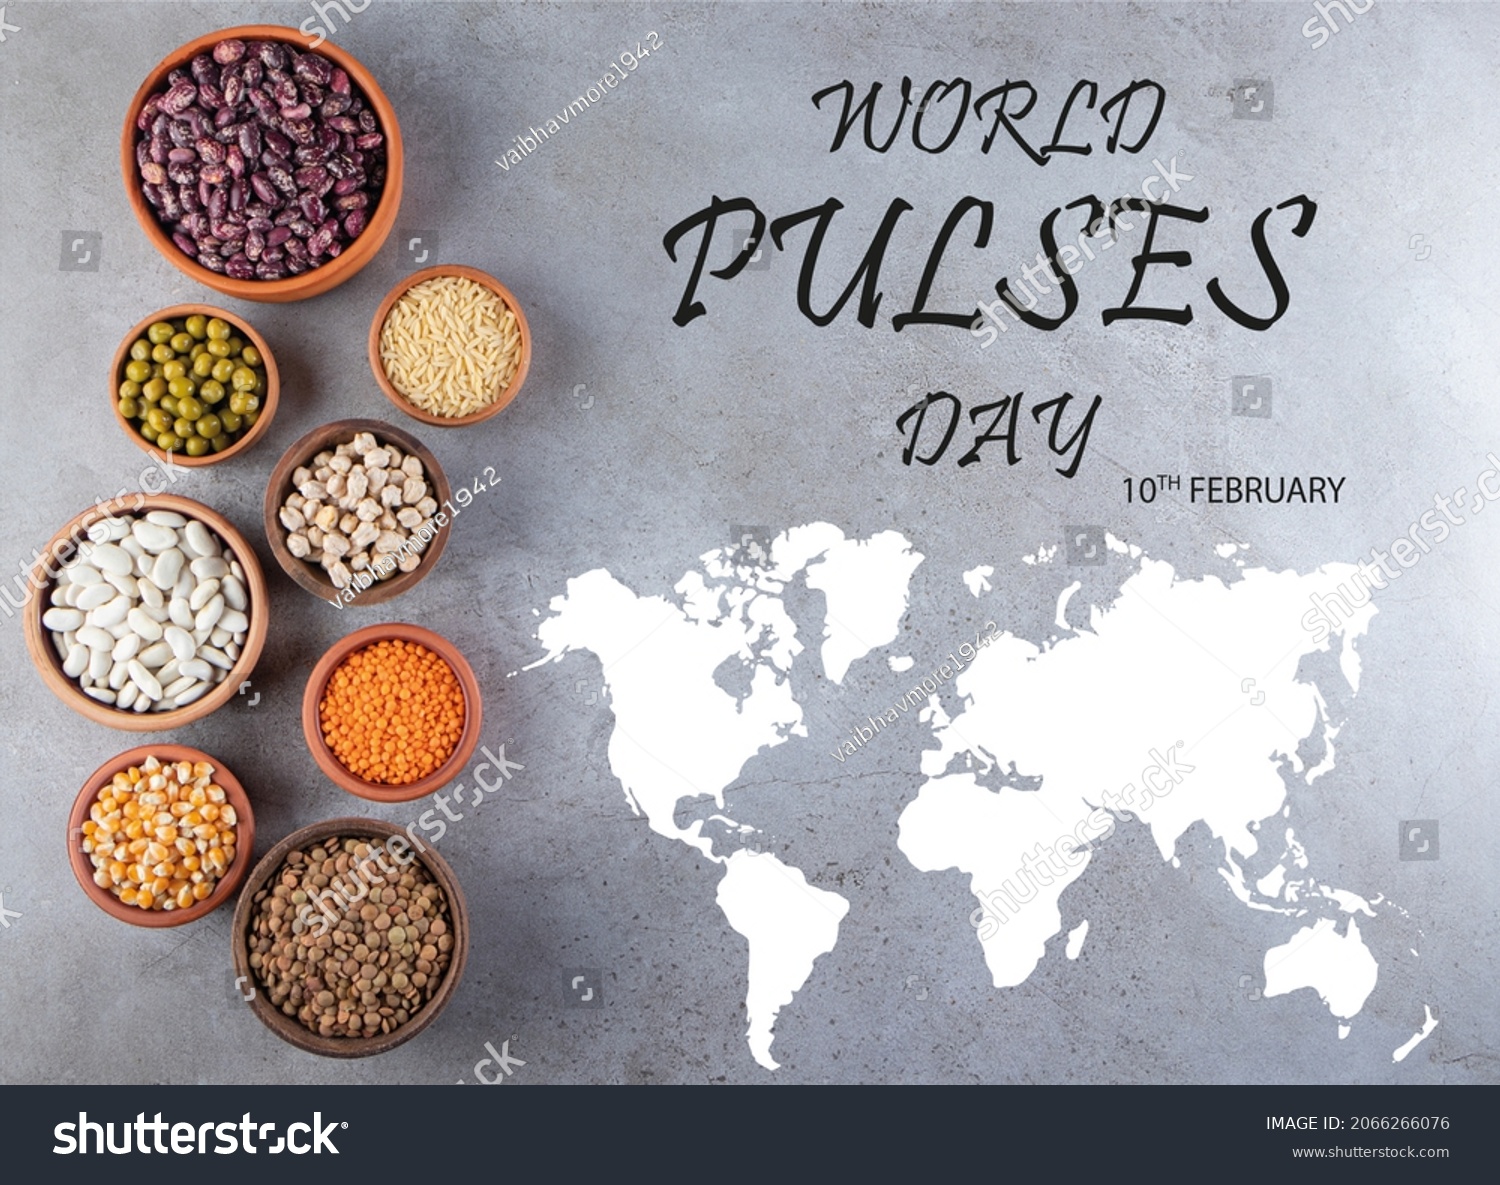 World Pulses Day poster design #2066266076